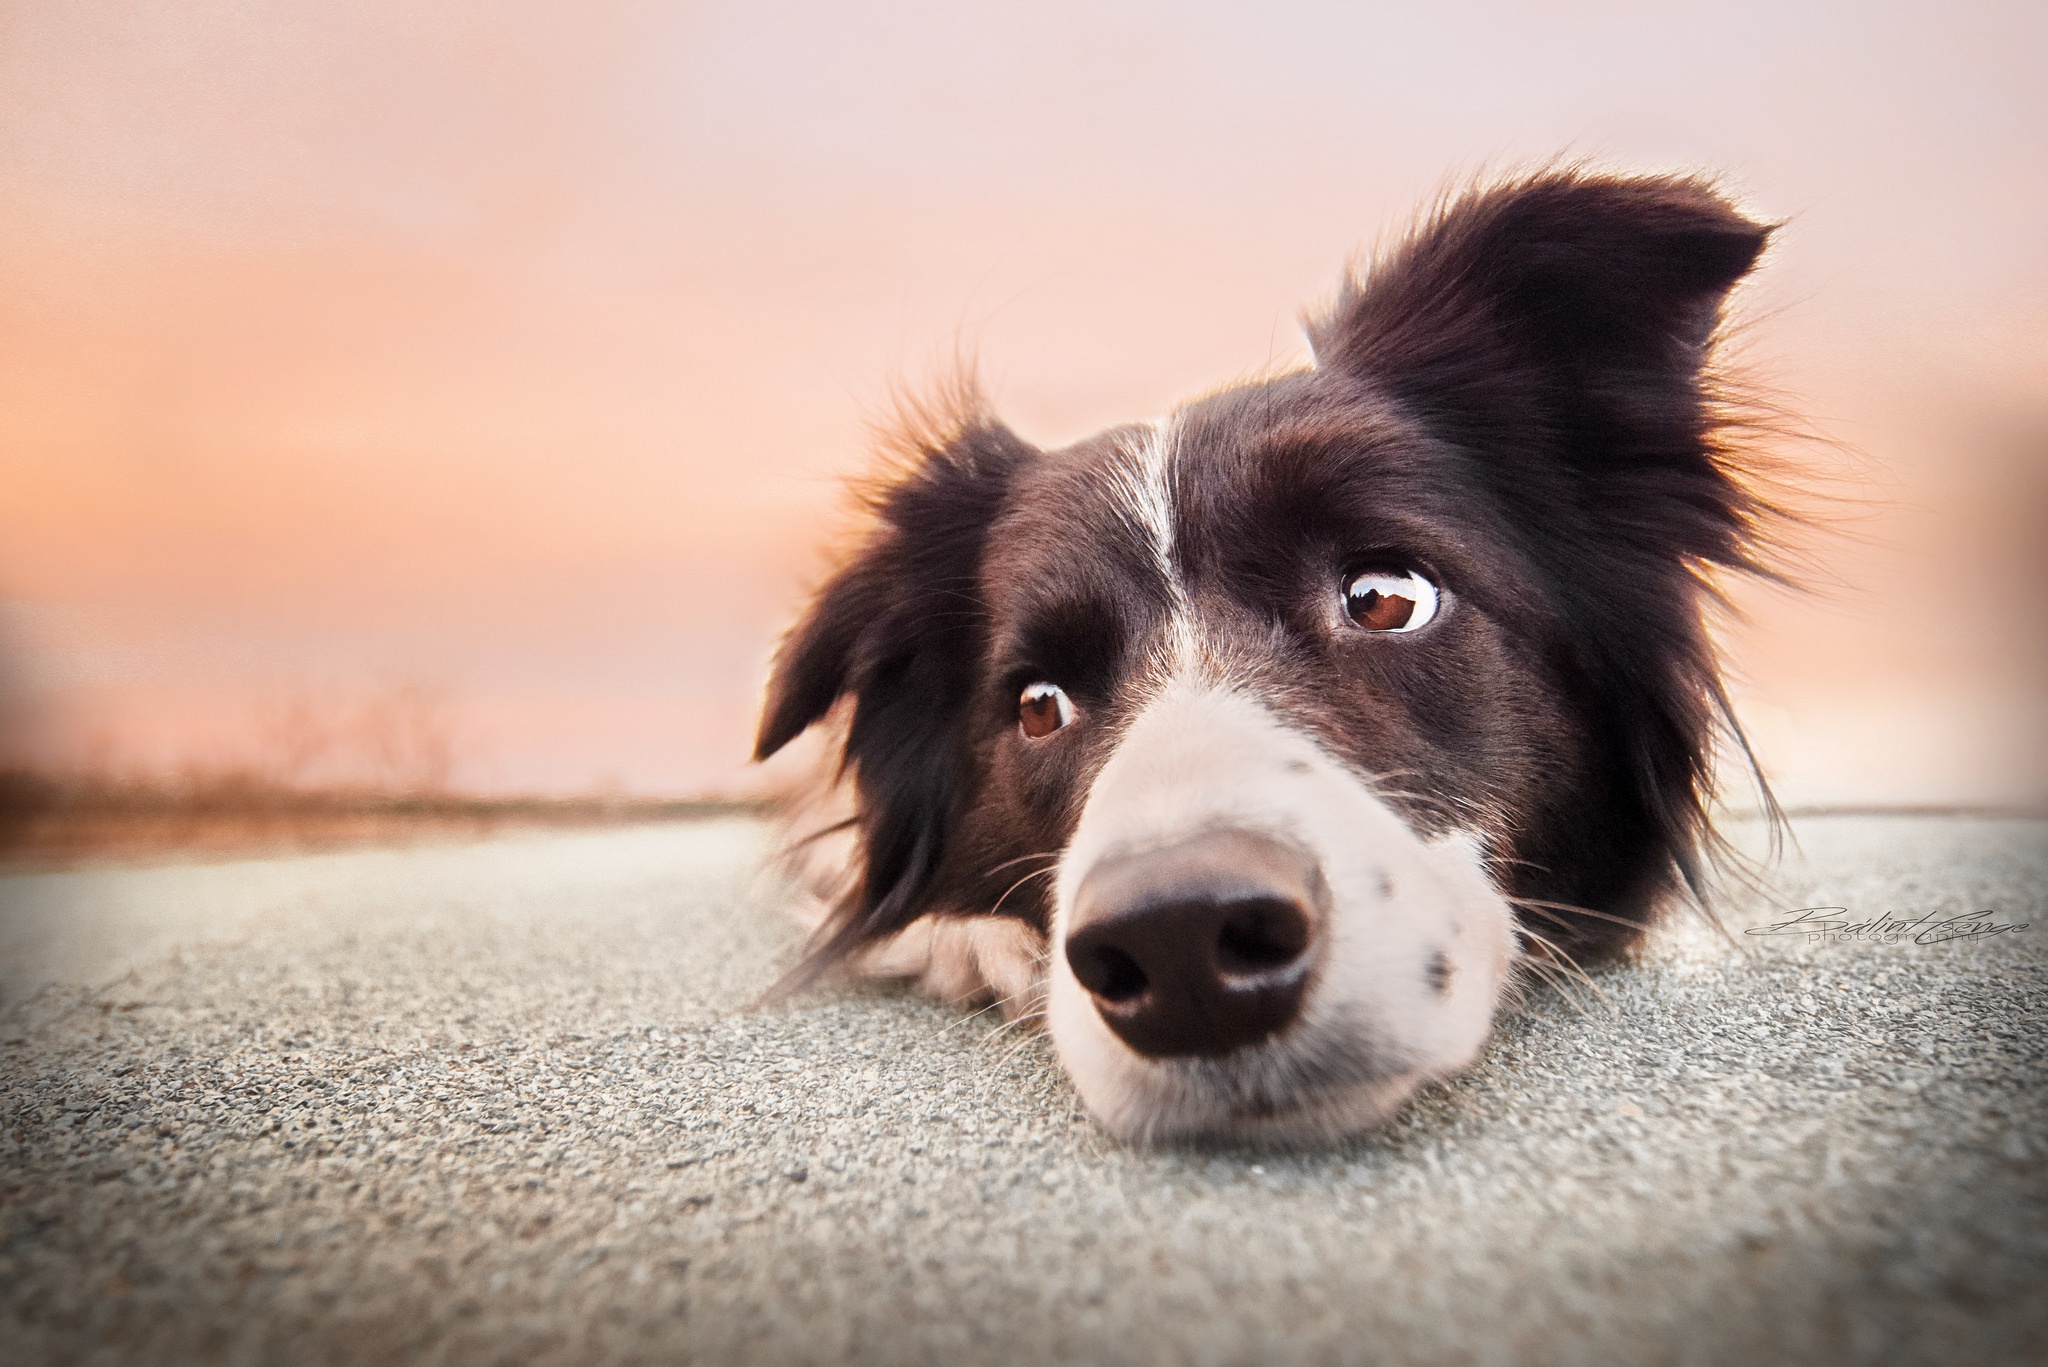 Free download wallpaper Dogs, Dog, Muzzle, Animal, Border Collie, Resting on your PC desktop